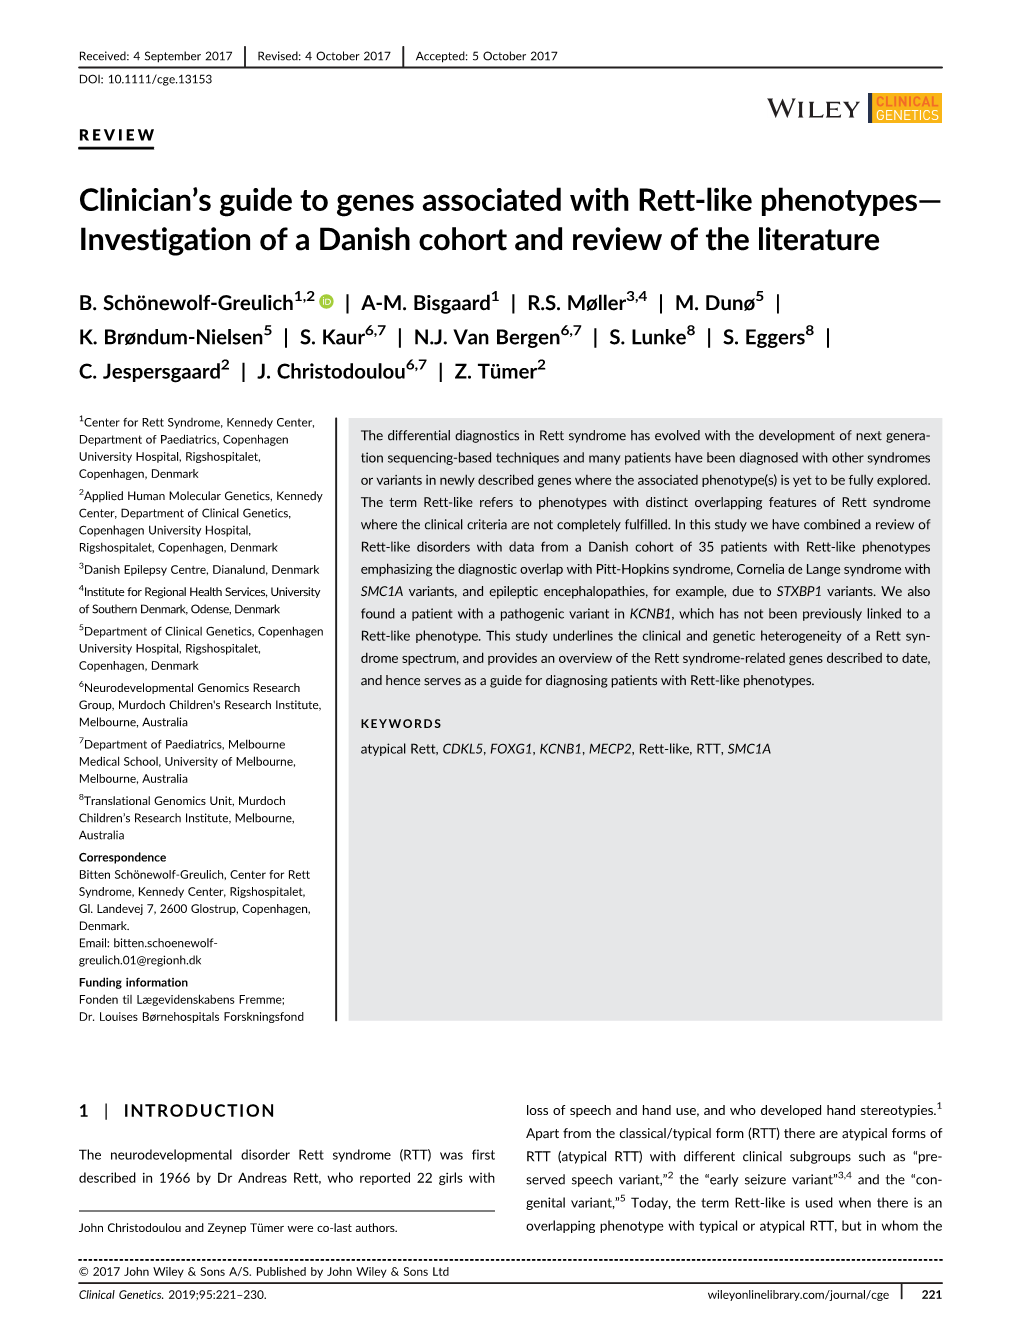 Clinician's Guide to Genes Associated with Rett‐Like Phenotypes